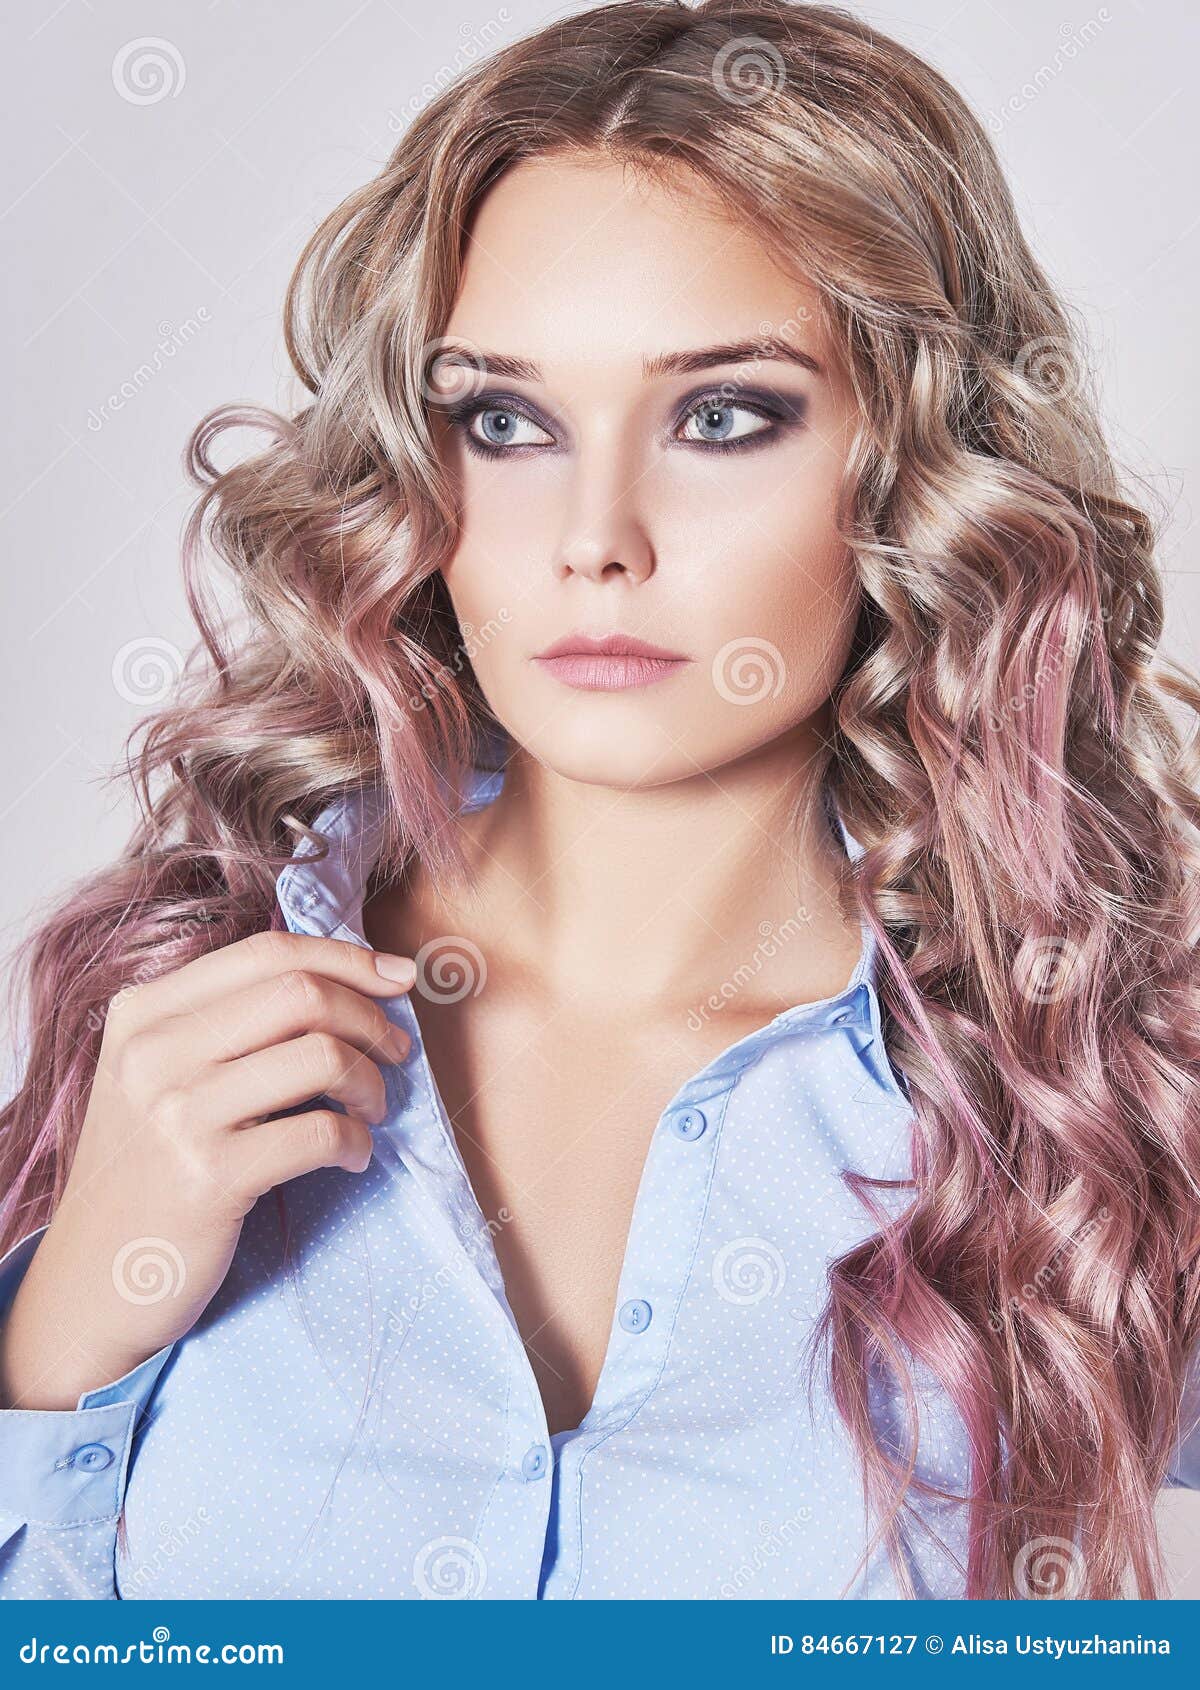 Girl with Colored Healthy Hair Stock Image - Image of care, adult: 84667127